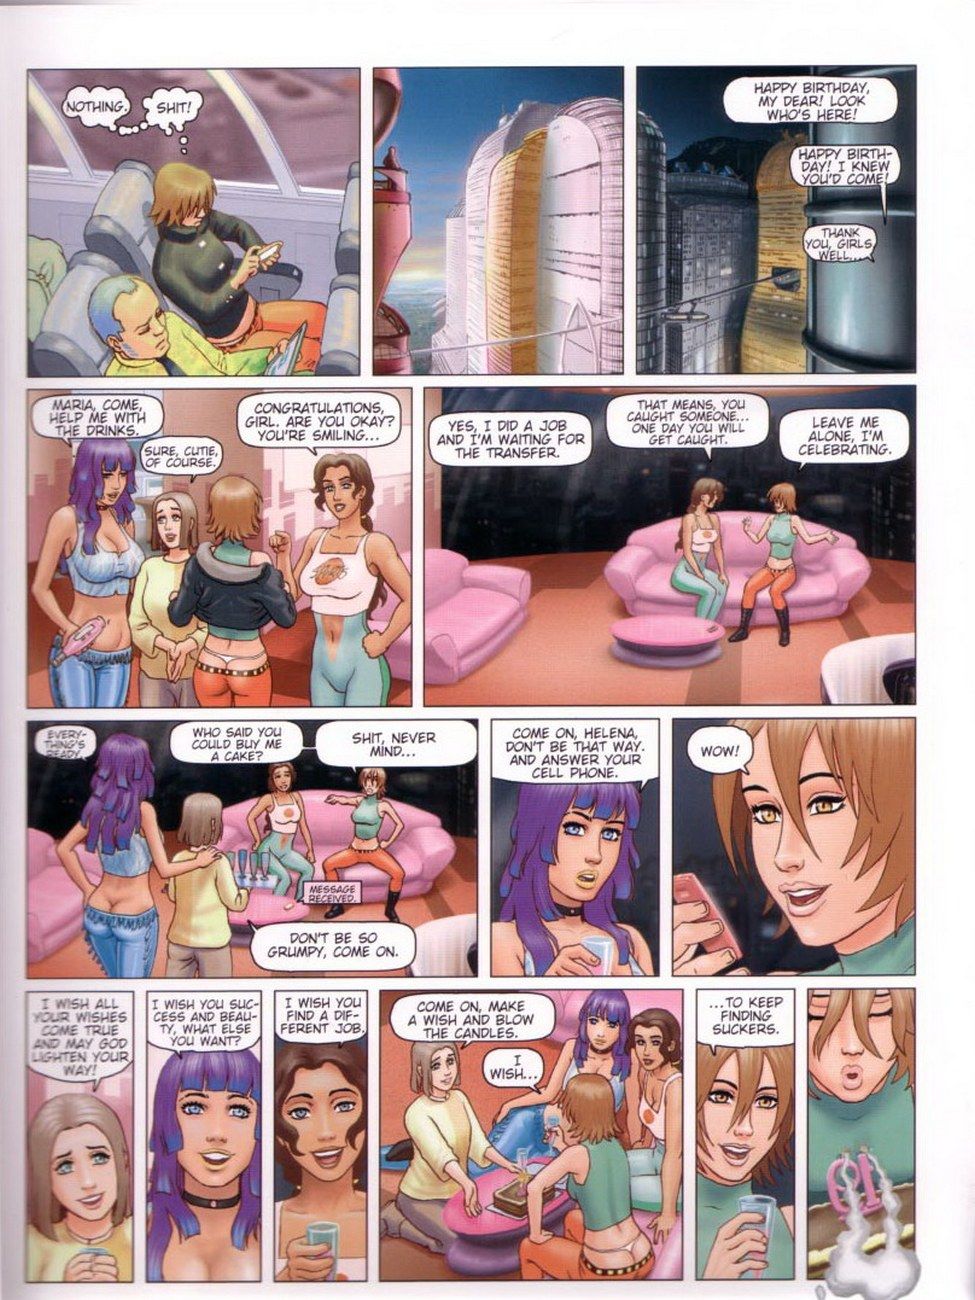 4 Girlfriends 1 page 8